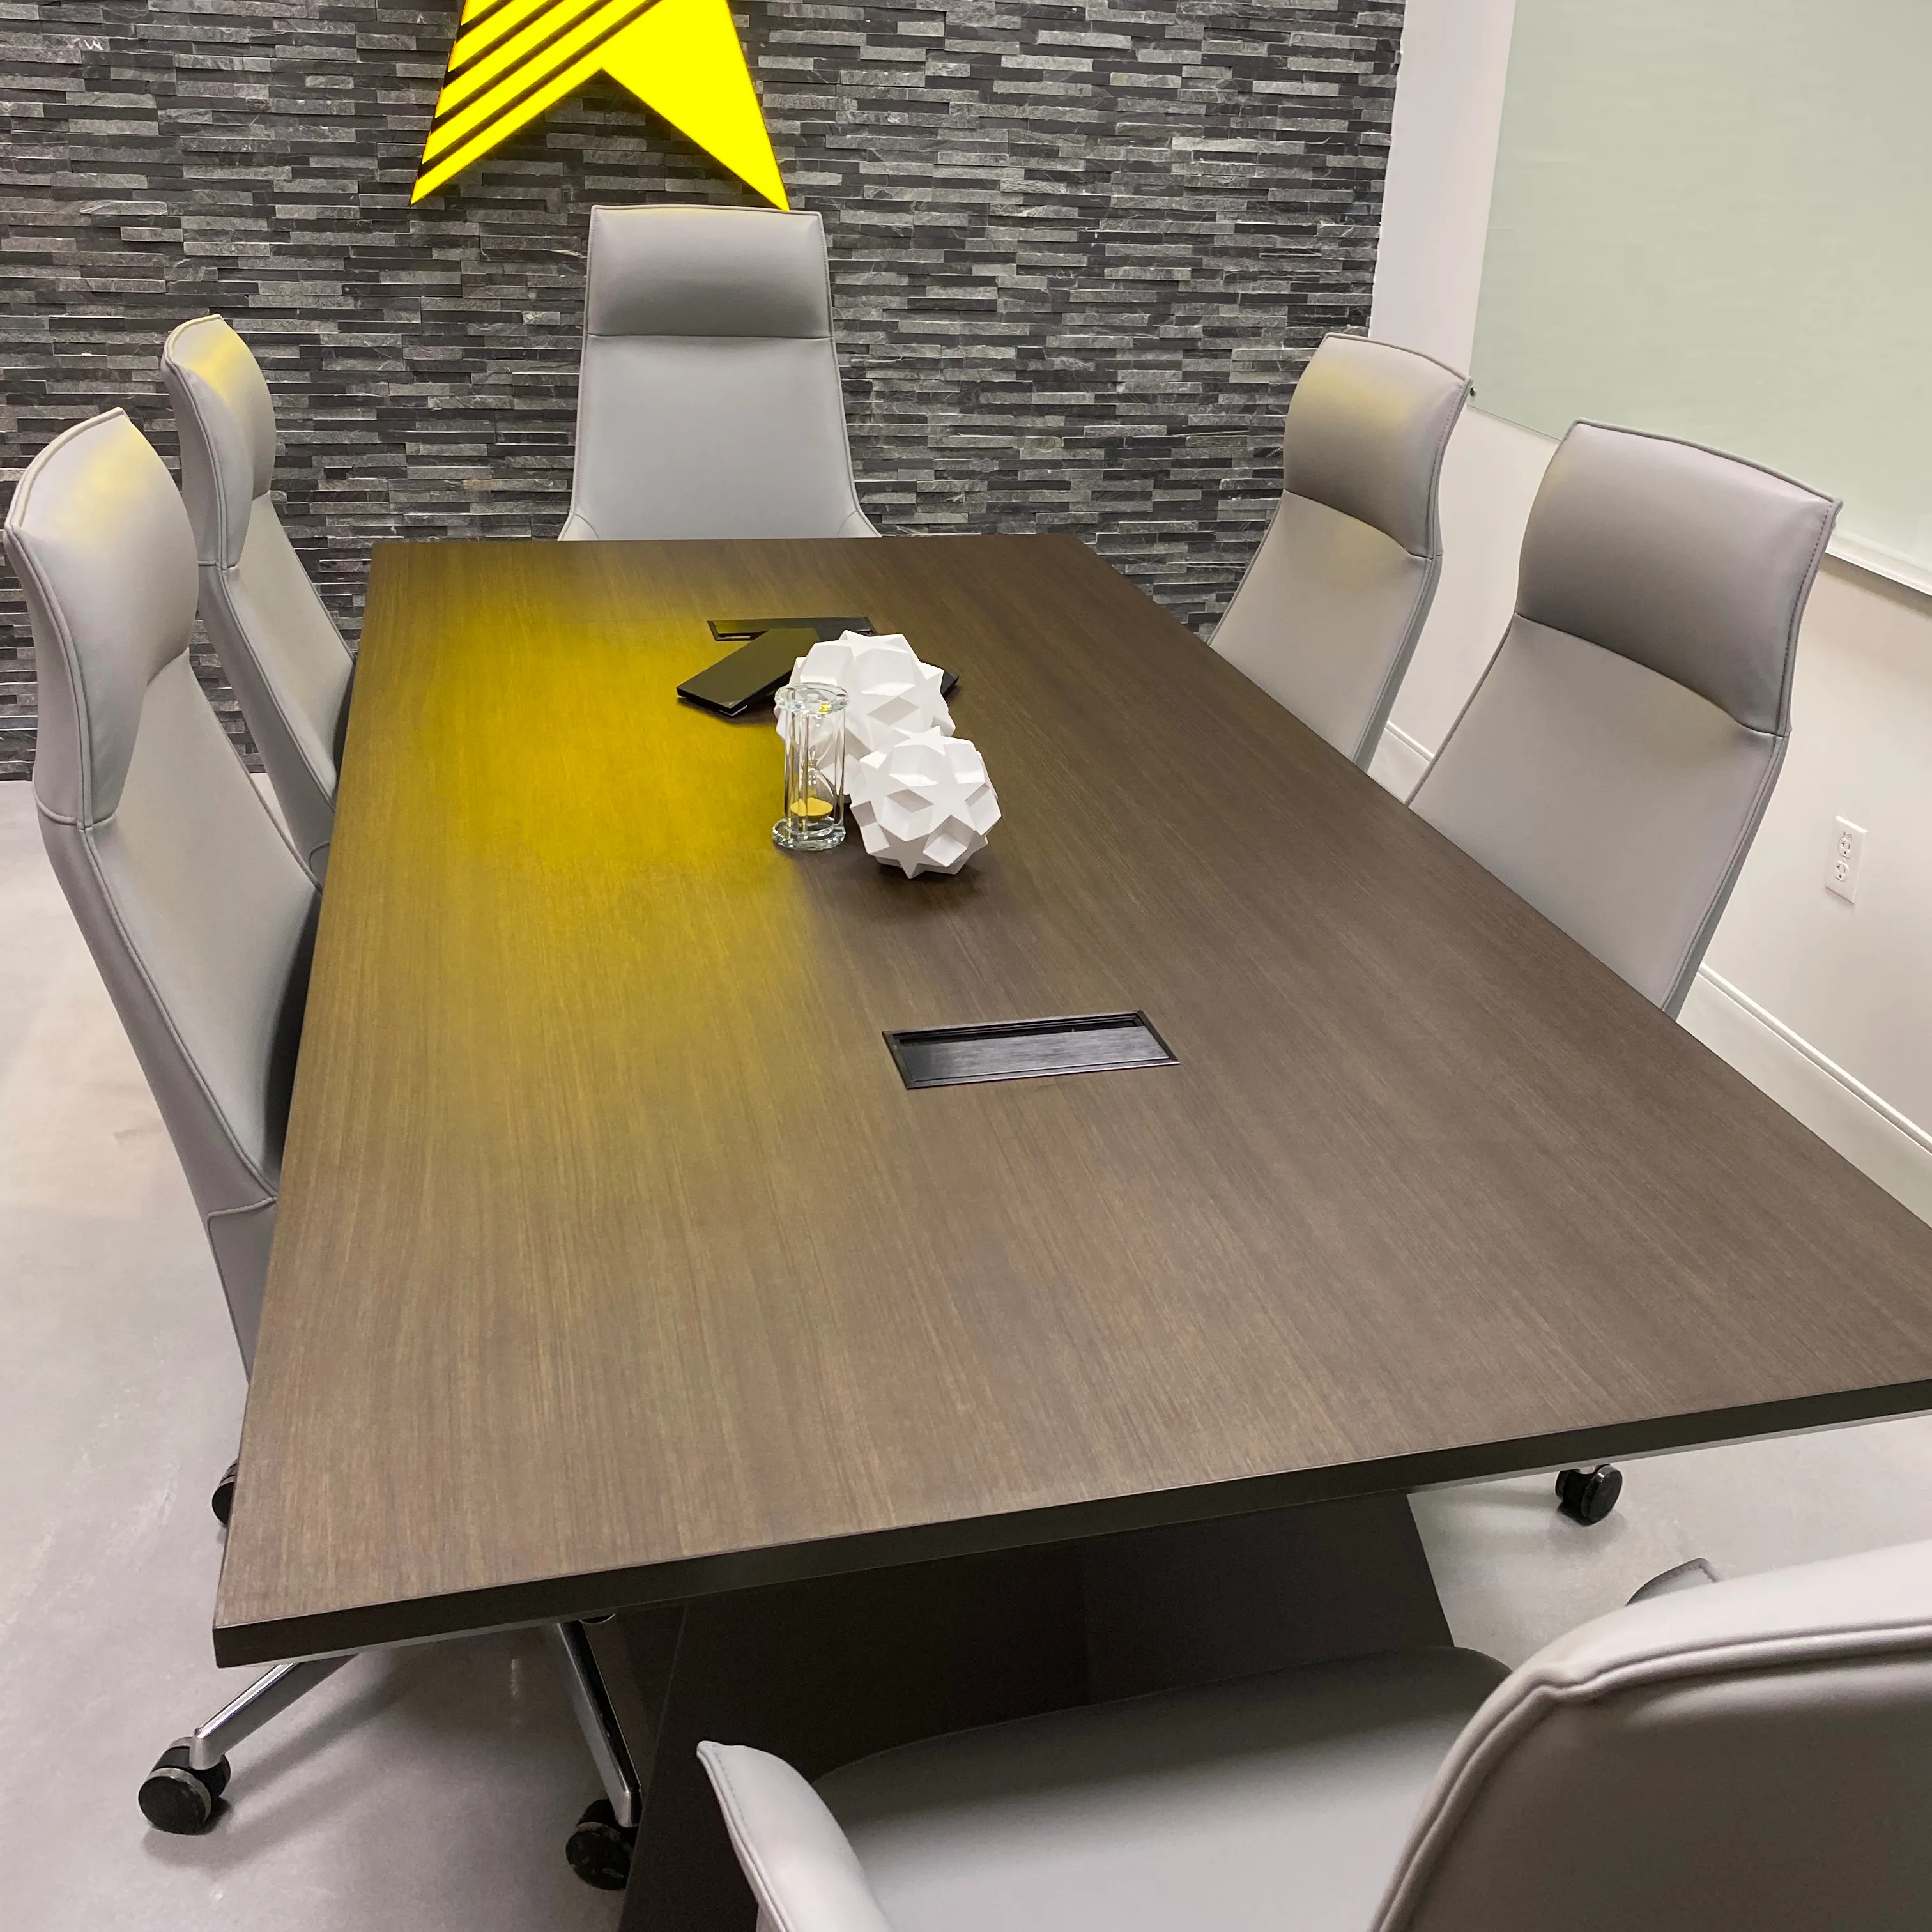 Grey Theme Meeting Table And Chair Decoration Ideas Design Images Conference Table